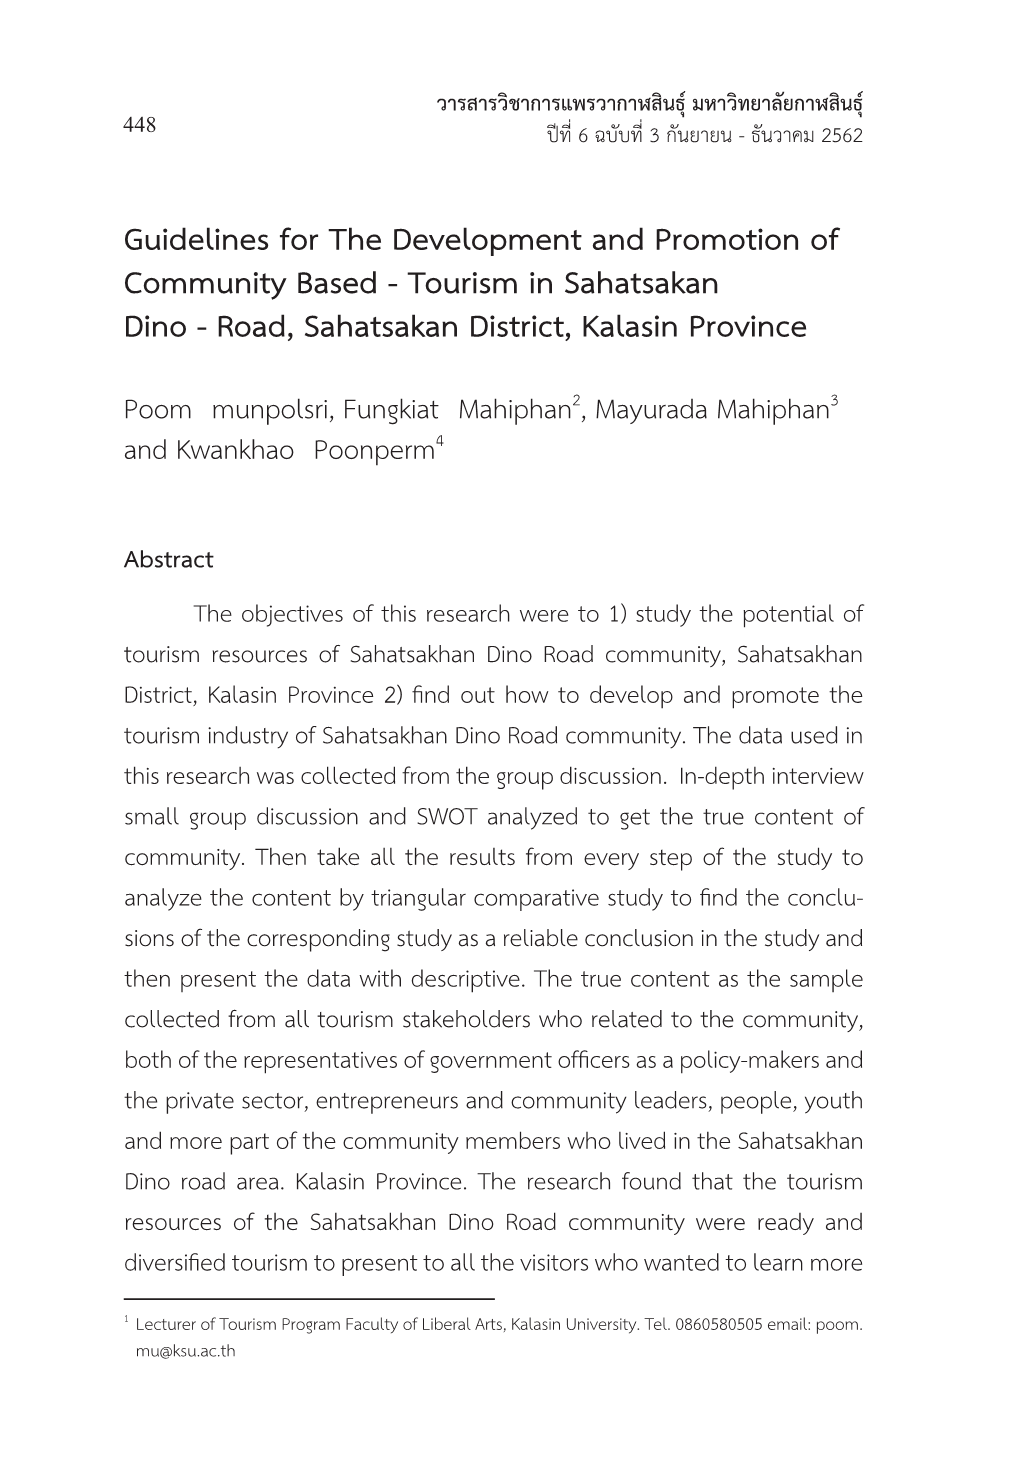 Guidelines for the Development and Promotion of Community Based - Tourism in Sahatsakan Dino - Road, Sahatsakan District, Kalasin Province